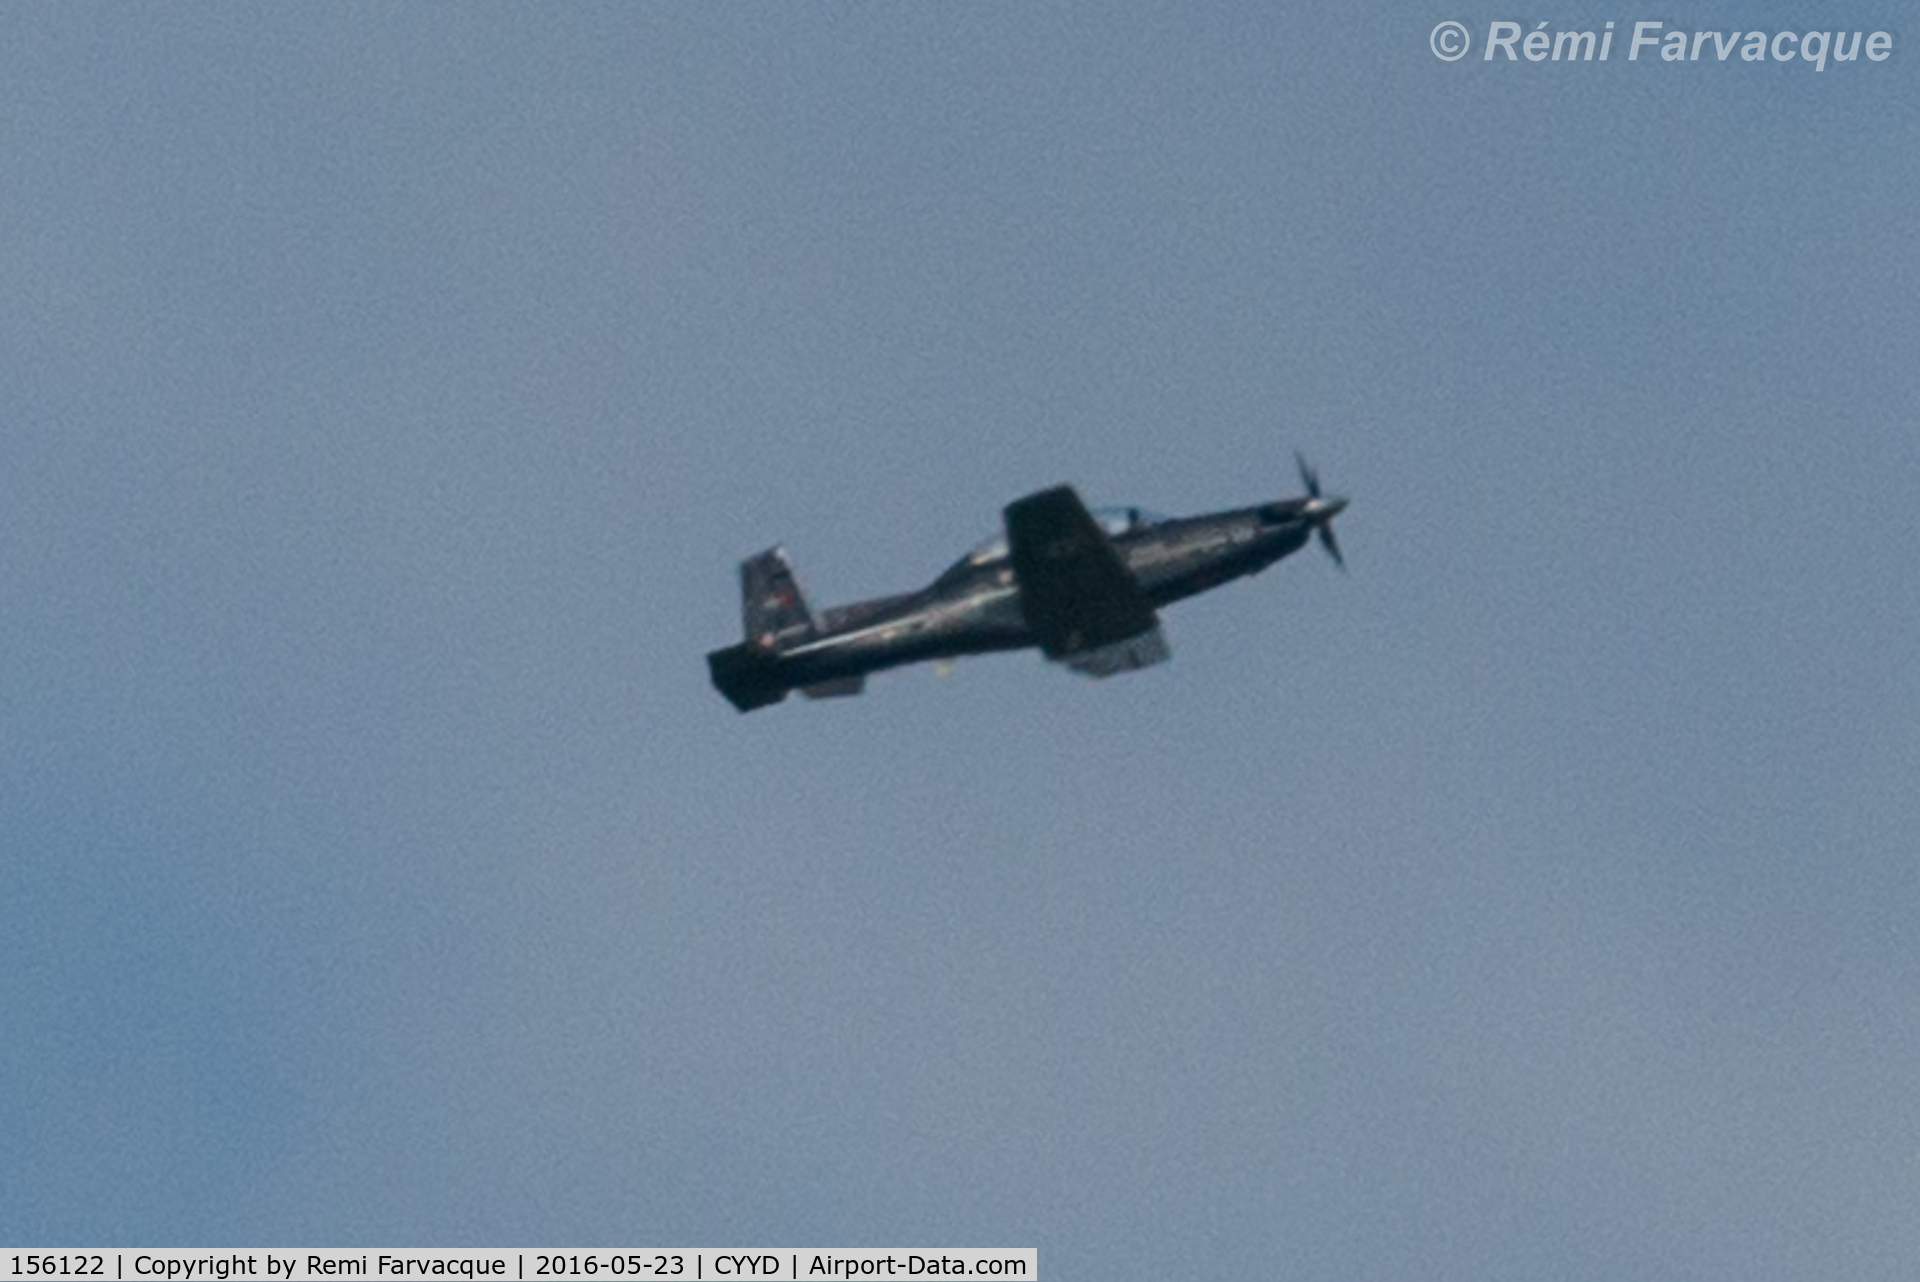 156122, 2000 Raytheon CT-156 Harvard II C/N PF-22, Take-off from Smithers airport (YYD)